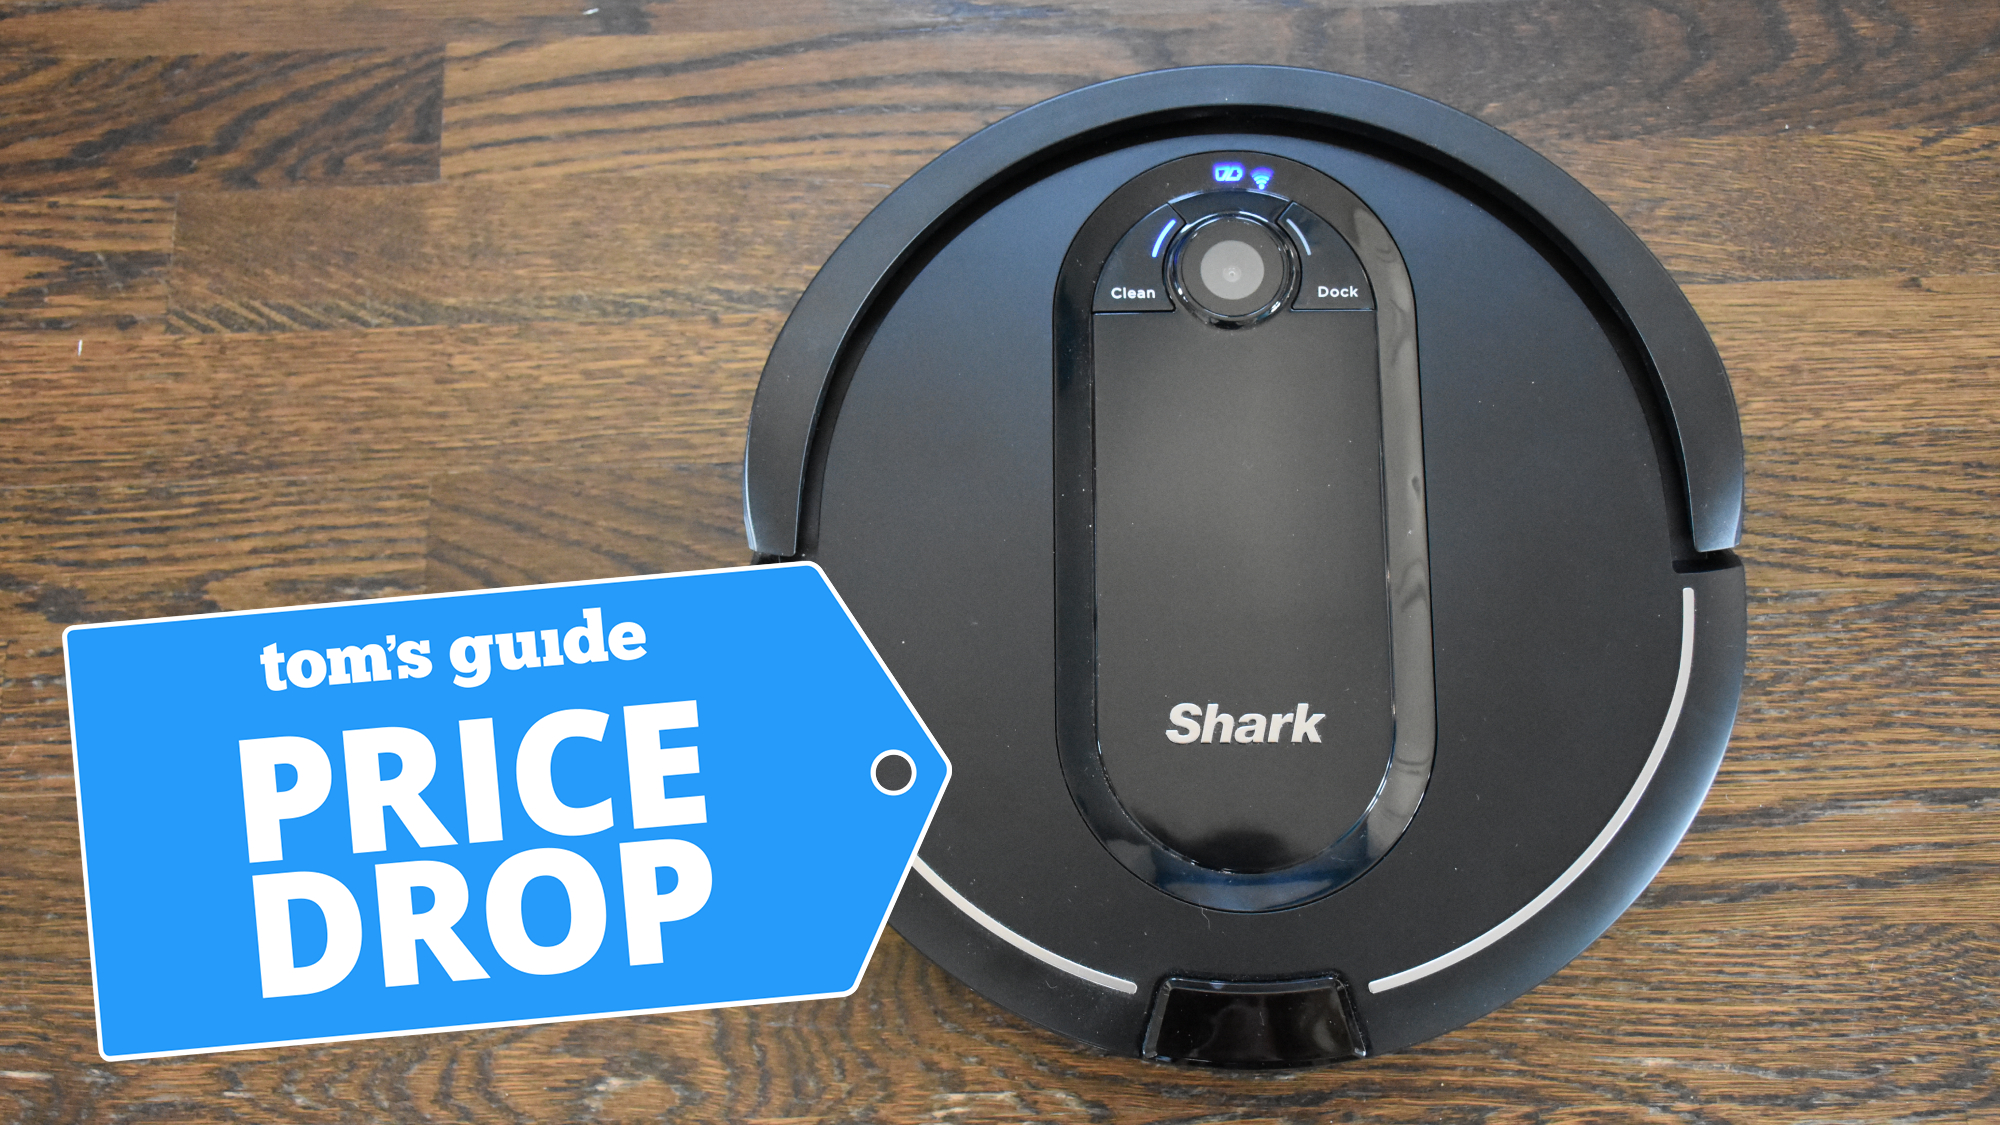 Shark vacuum-mop combo is 35% off with this exclusive coupon code Tom's Guide